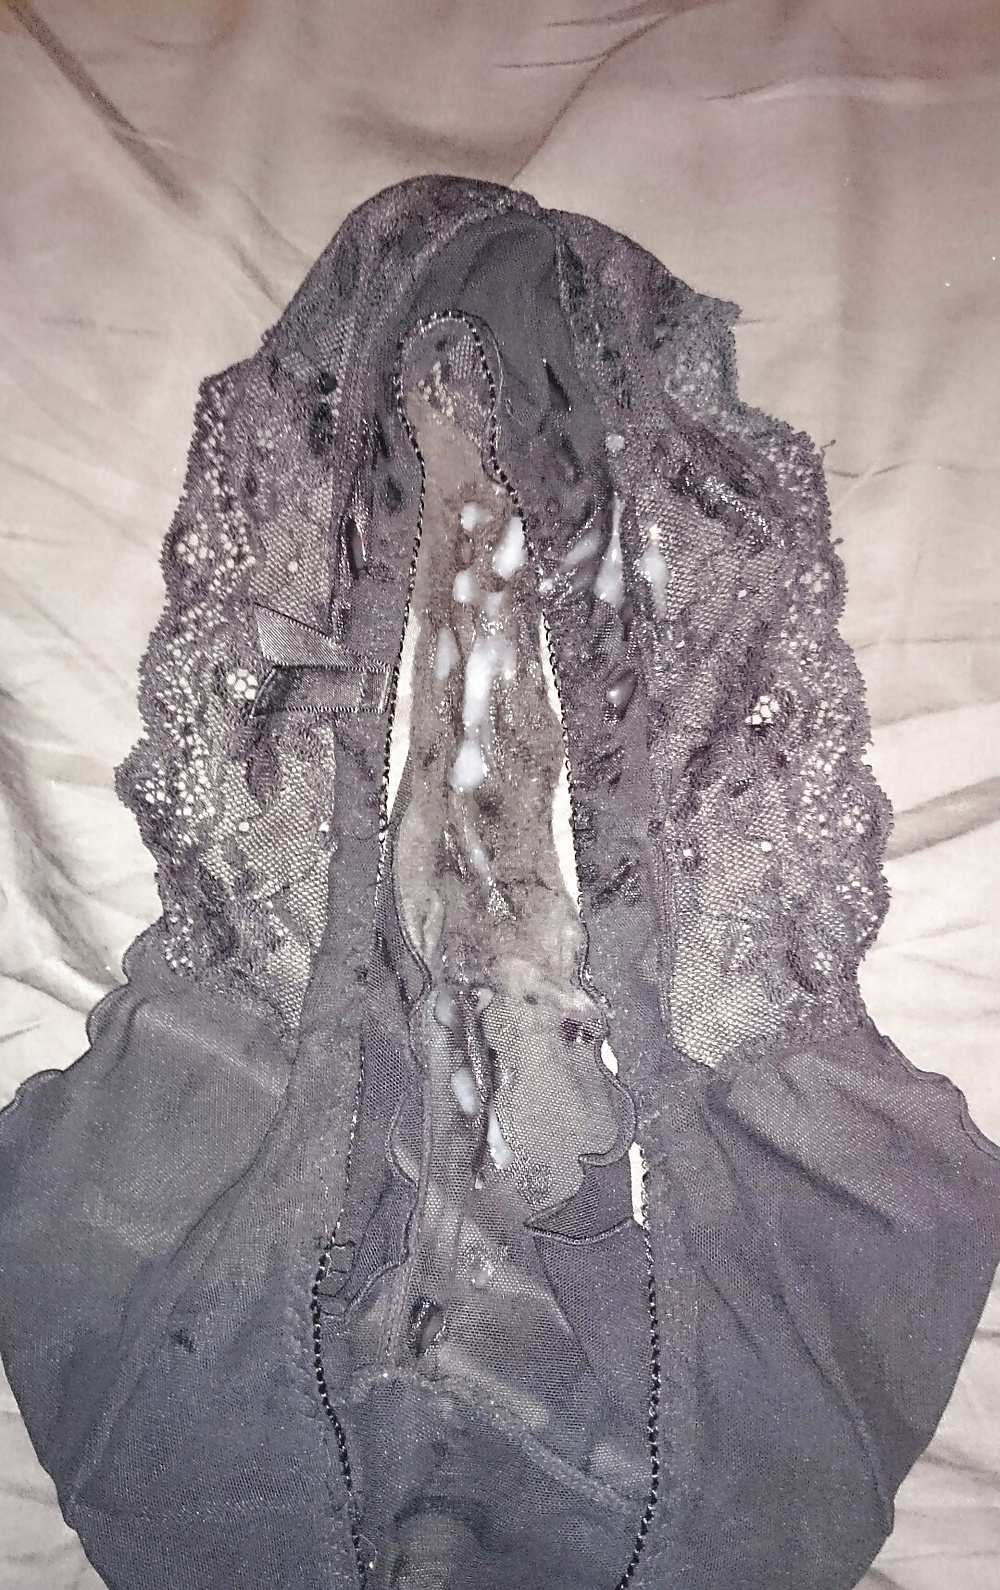 Porn Pics Gf's panties filled with my cum, before and after